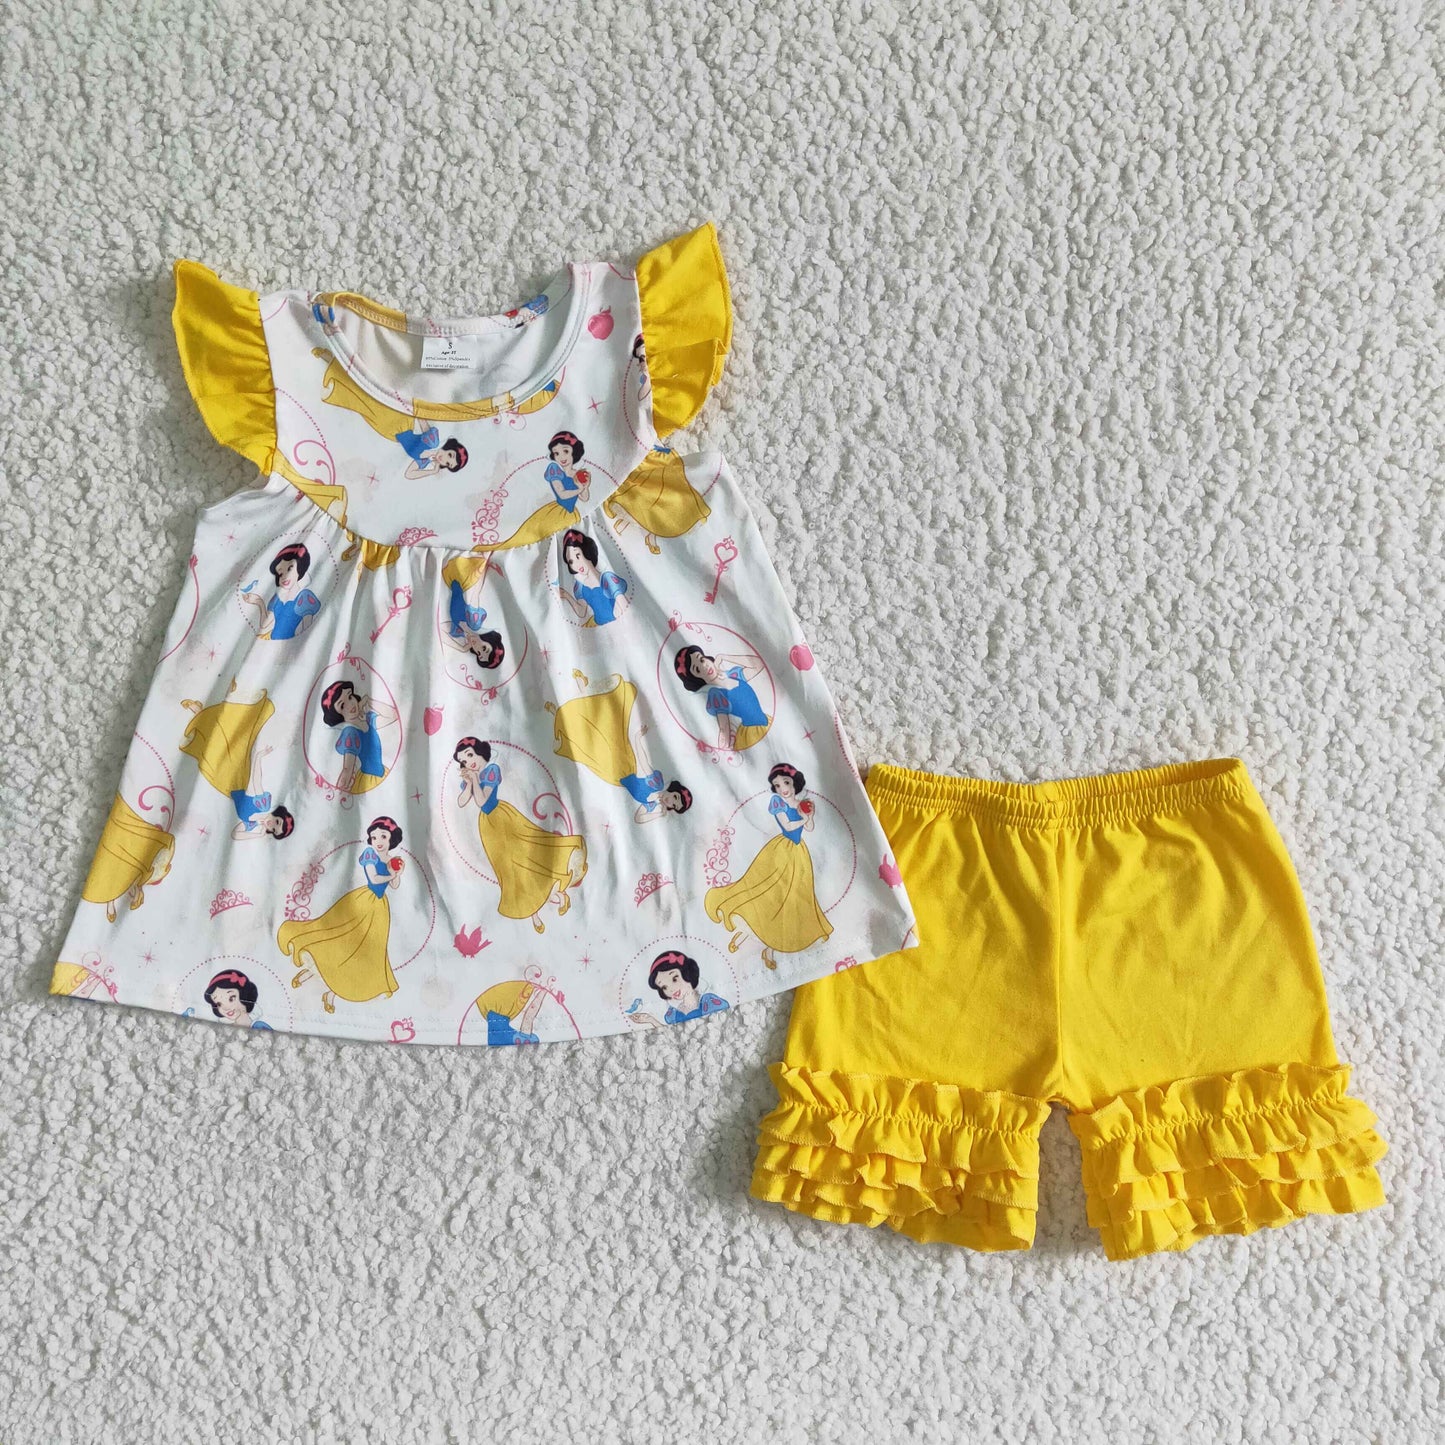 A17-5-1  Summer Girls Snow White Princess Outfit